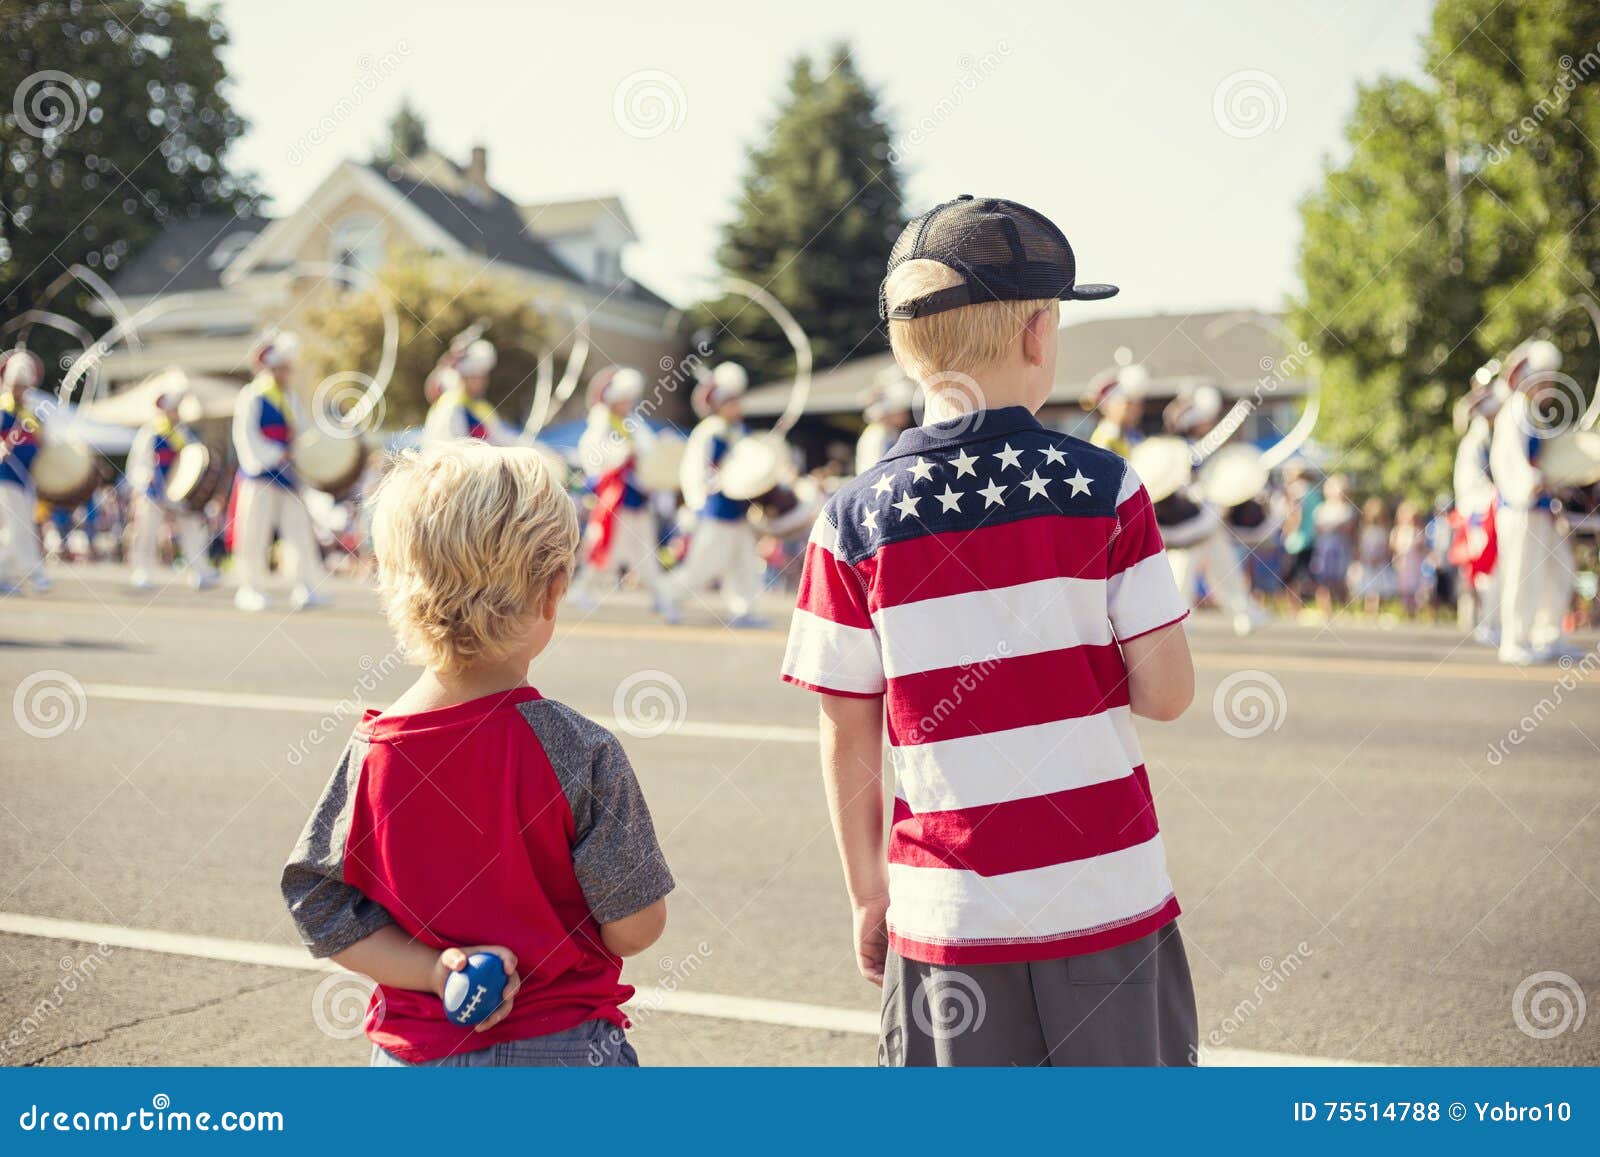 kids watching an independence day parade